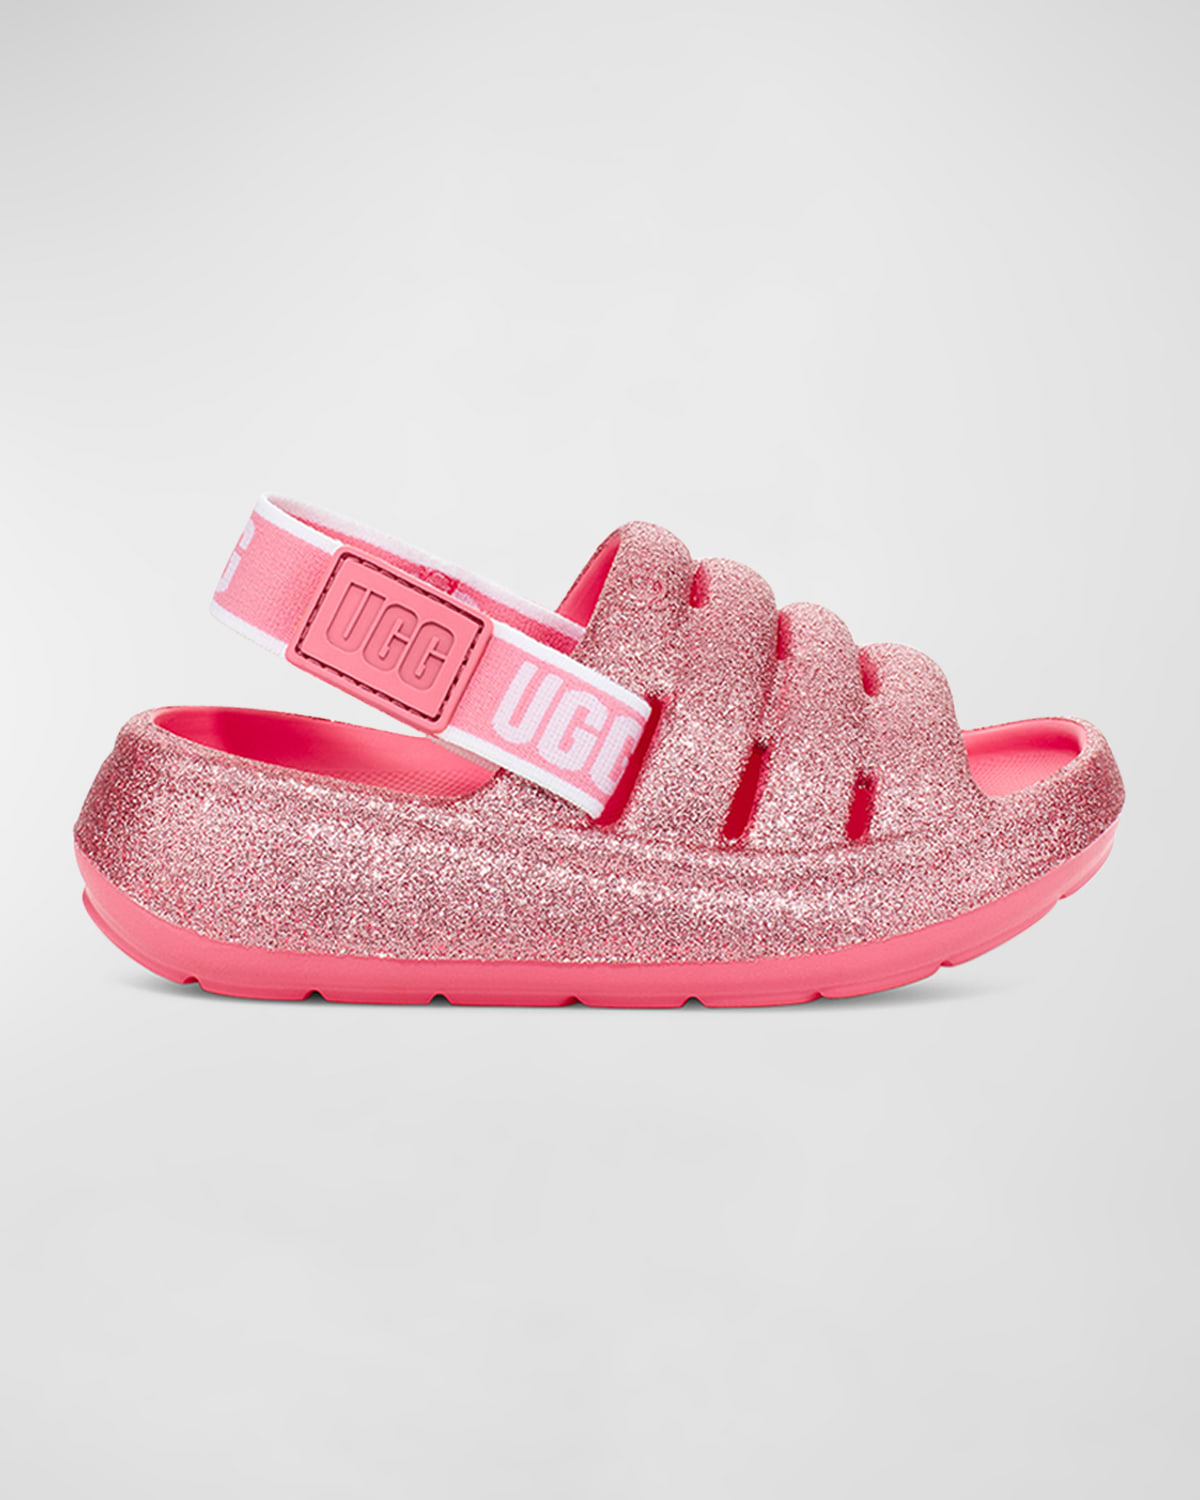 UGG GIRL'S SPORT YEAH GLITTER SANDALS, BABY/TODDLERS